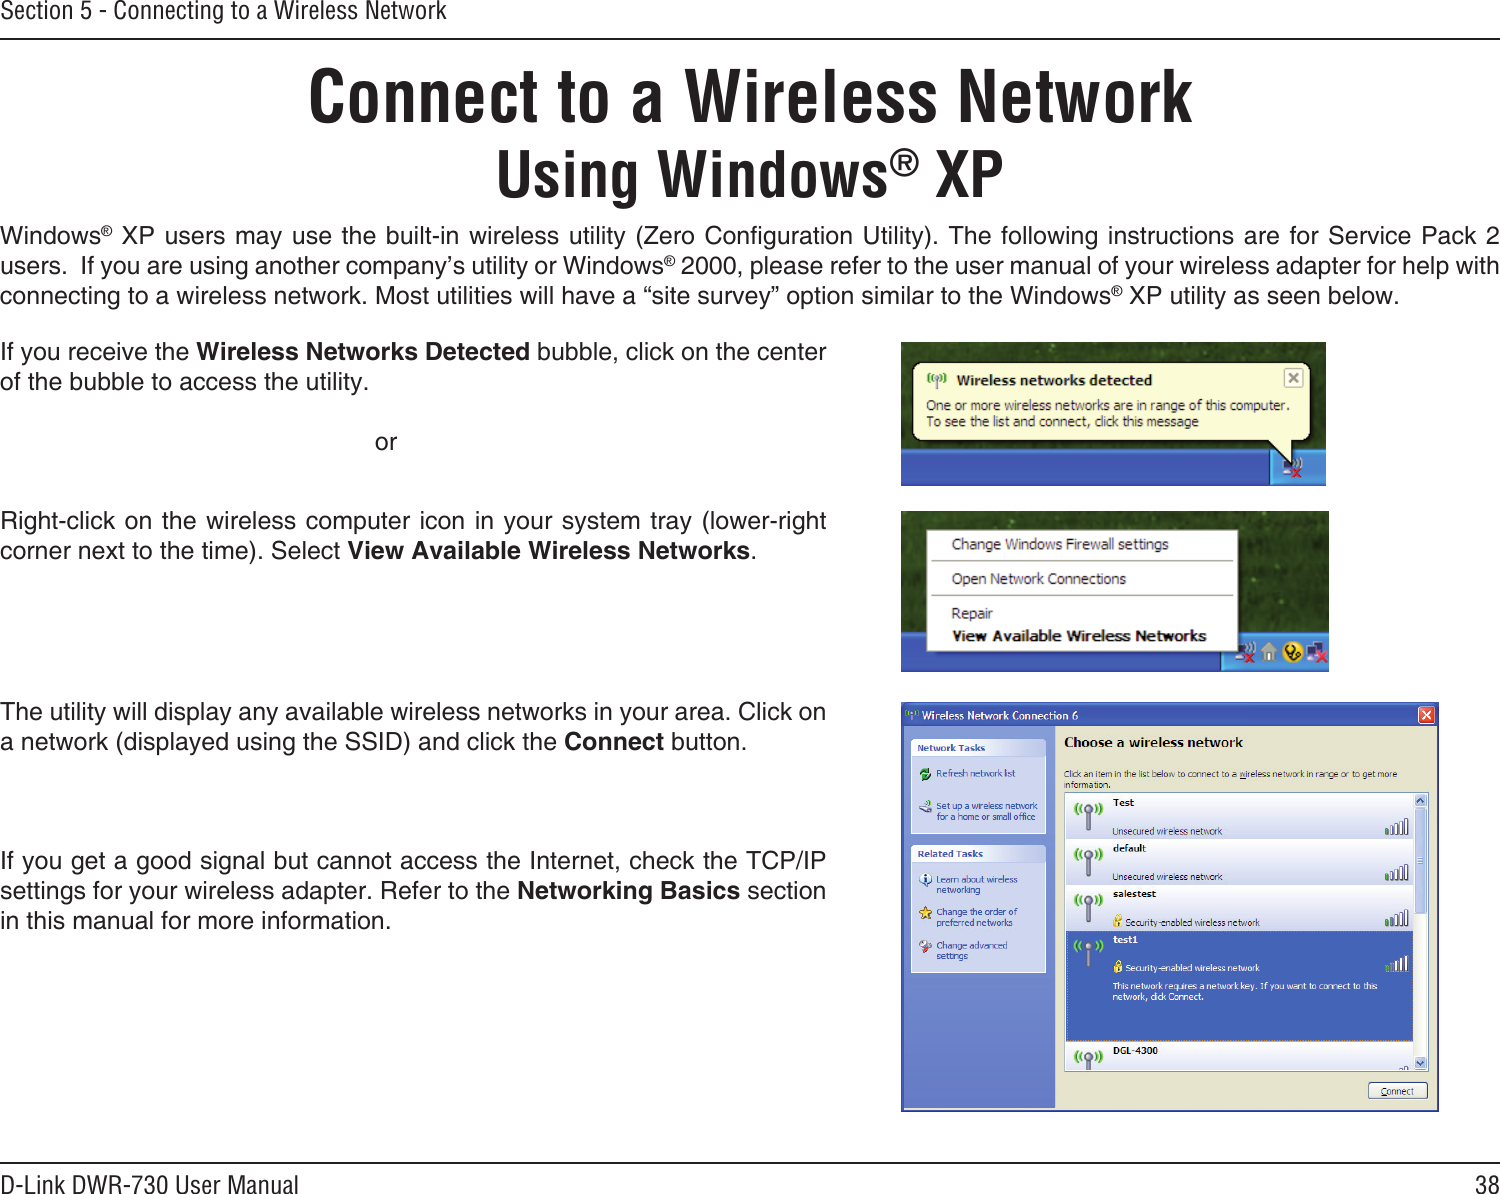 38D-Link DWR-730 User ManualSection 5 - Connecting to a Wireless NetworkConnect to a Wireless NetworkUsing Windows® XP 